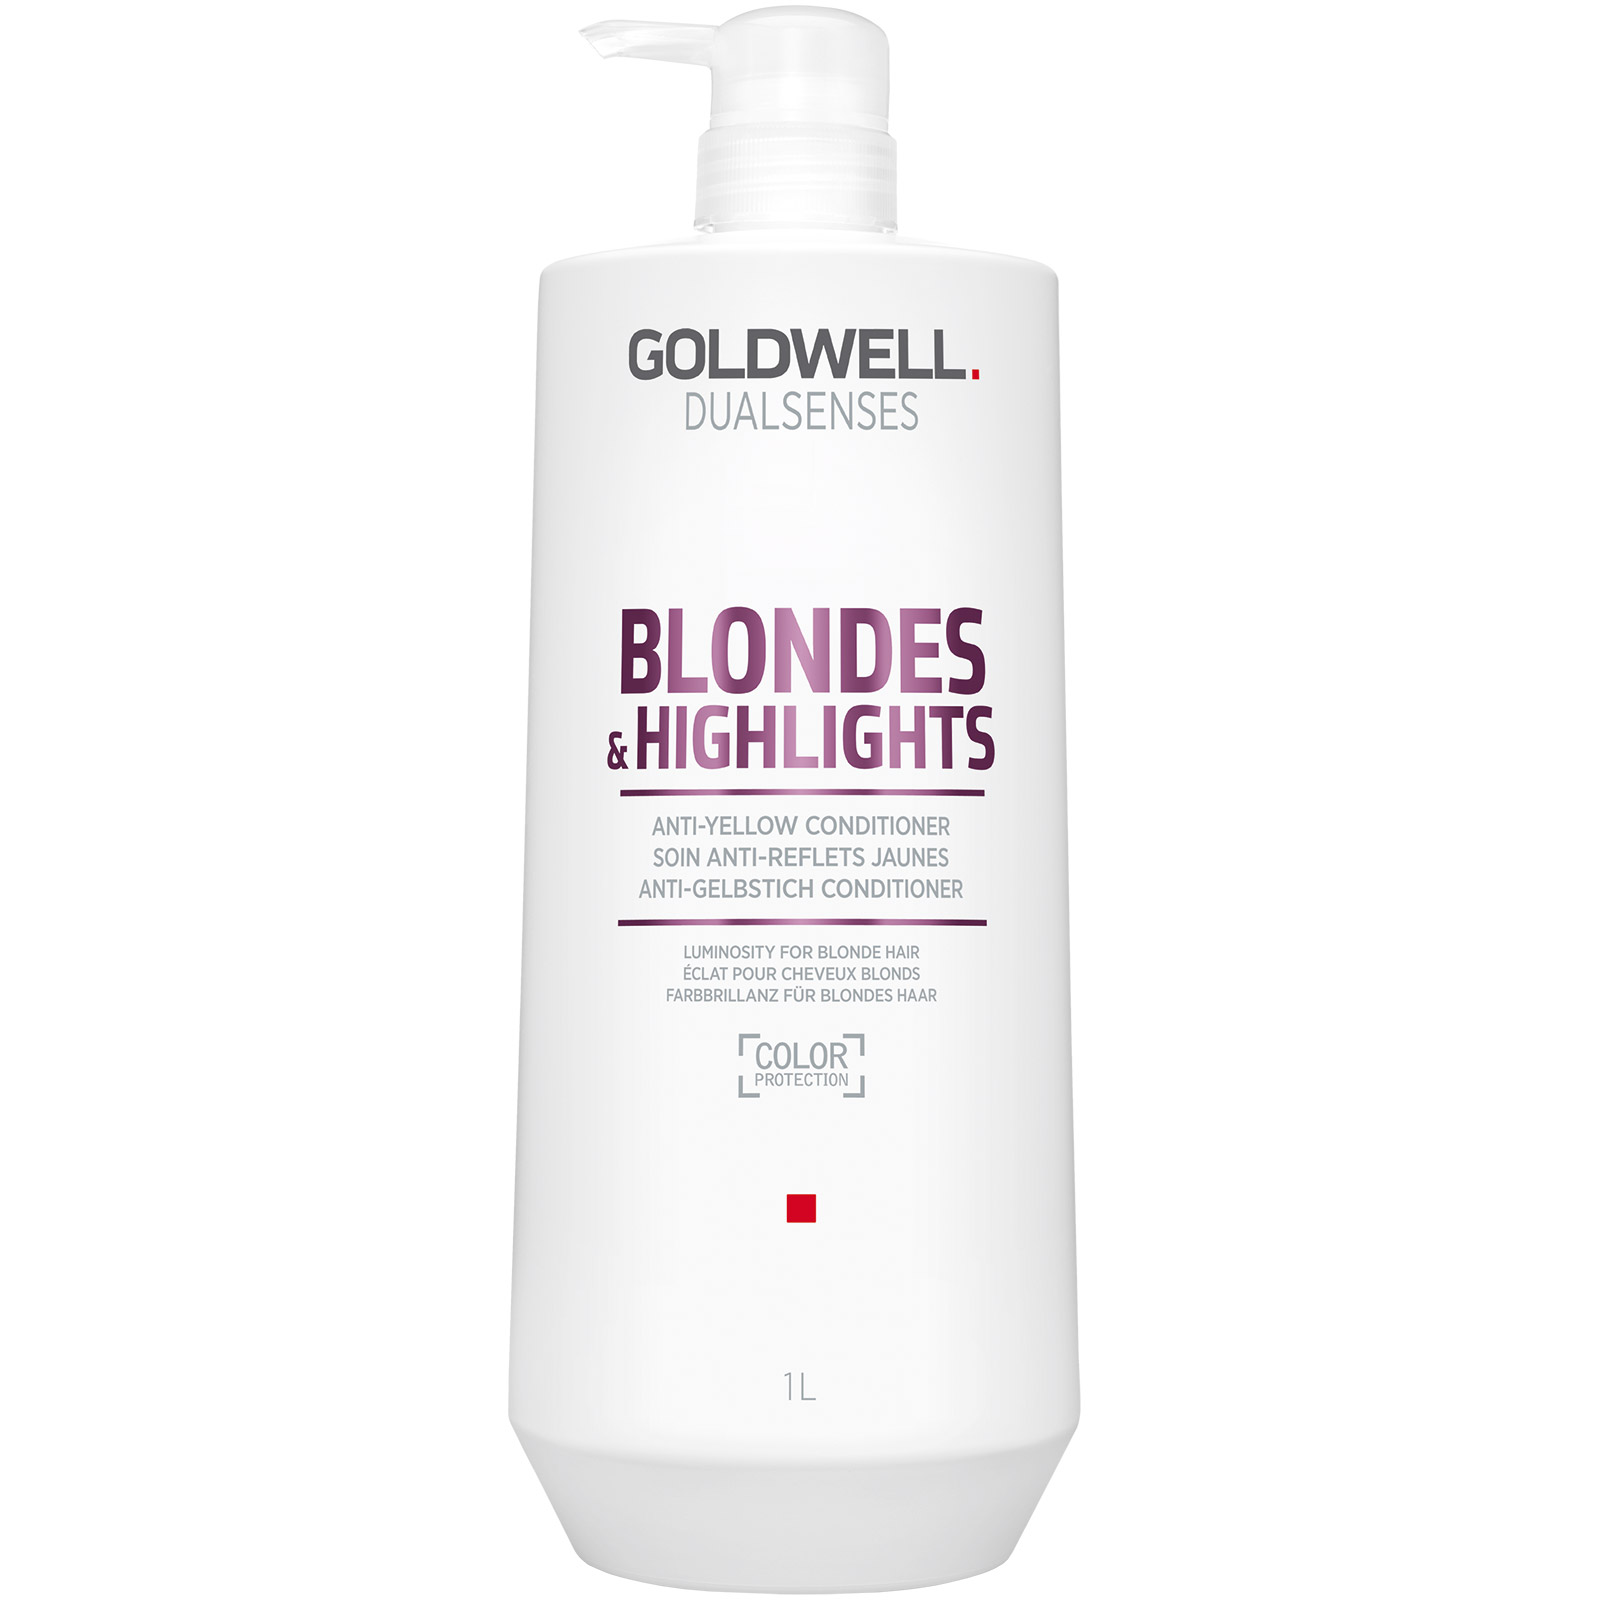 Goldwell - Dualsenses Blondes&Highlights - Anti-Yellow Conditioner - 1000 ml